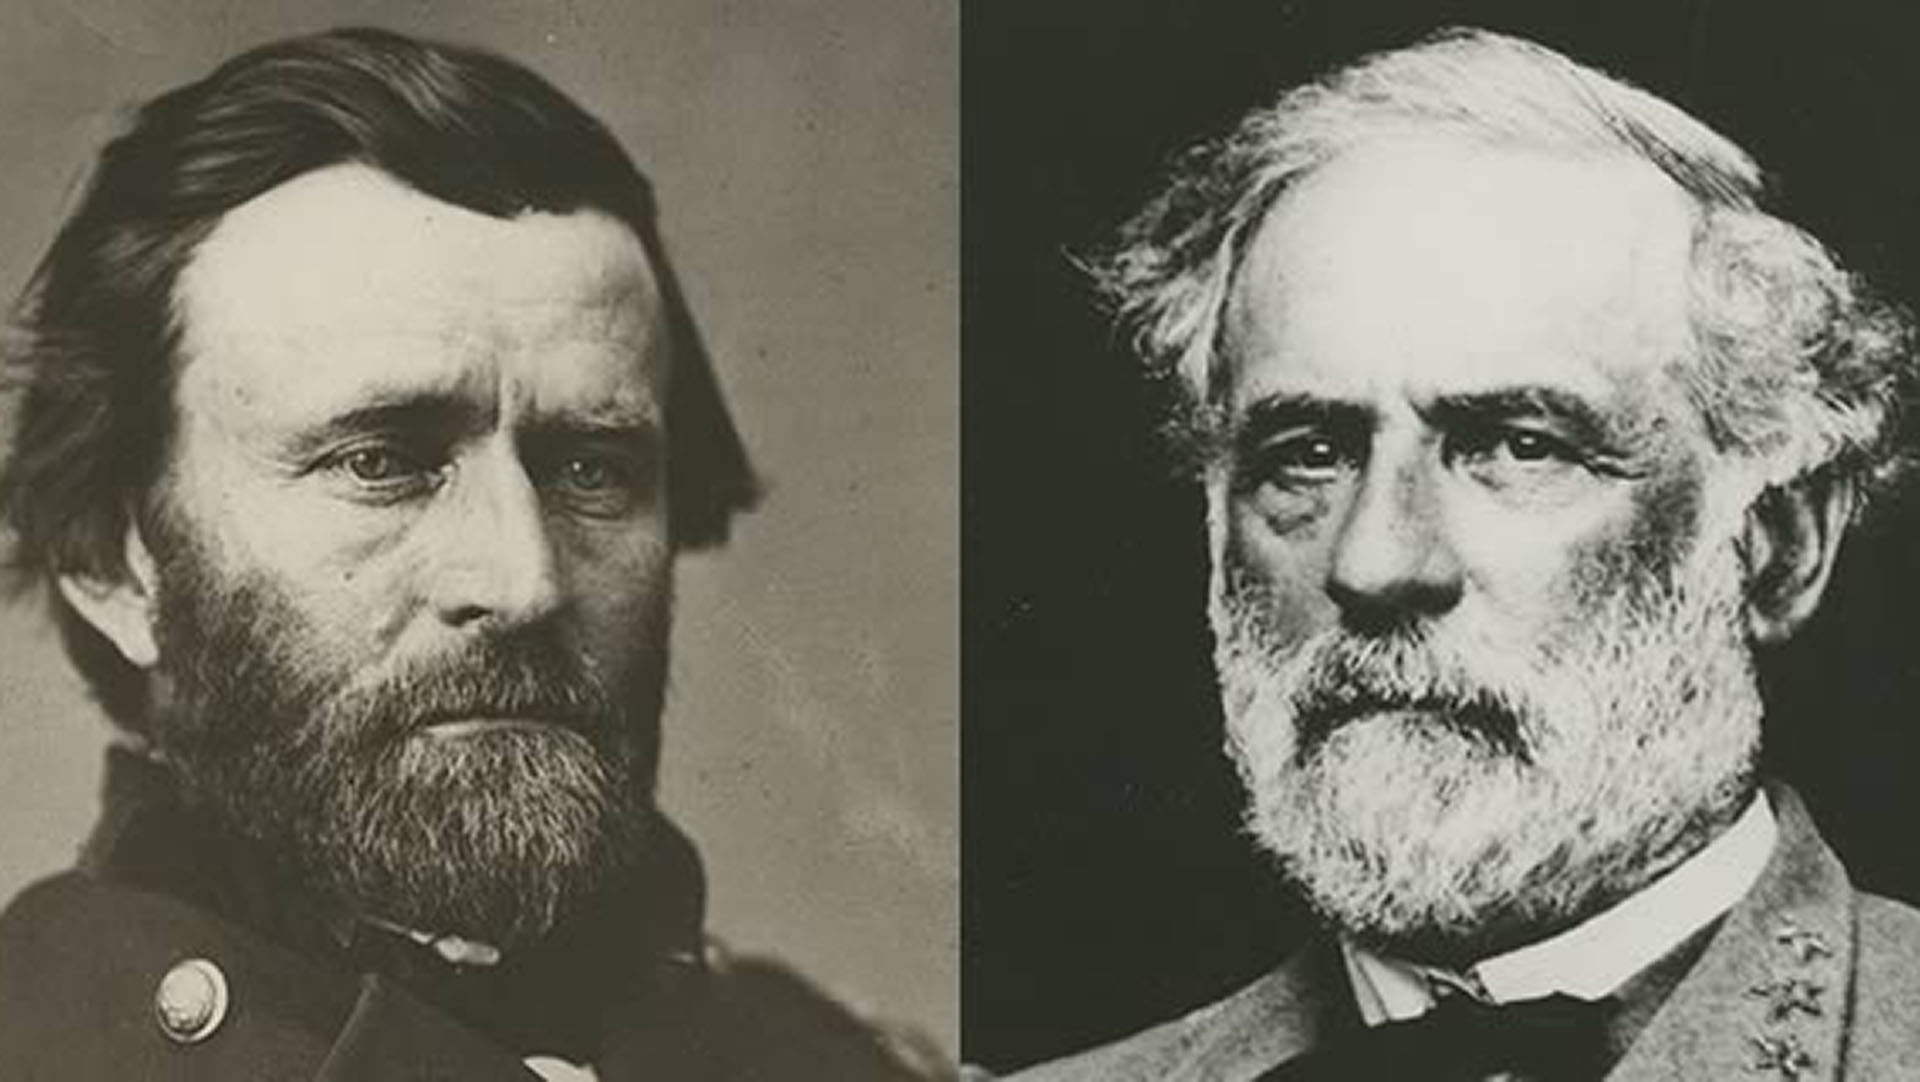 A black-and-white composite photo, split down the middle, showing both Ulysses S. Grant and Robert E. Lee.